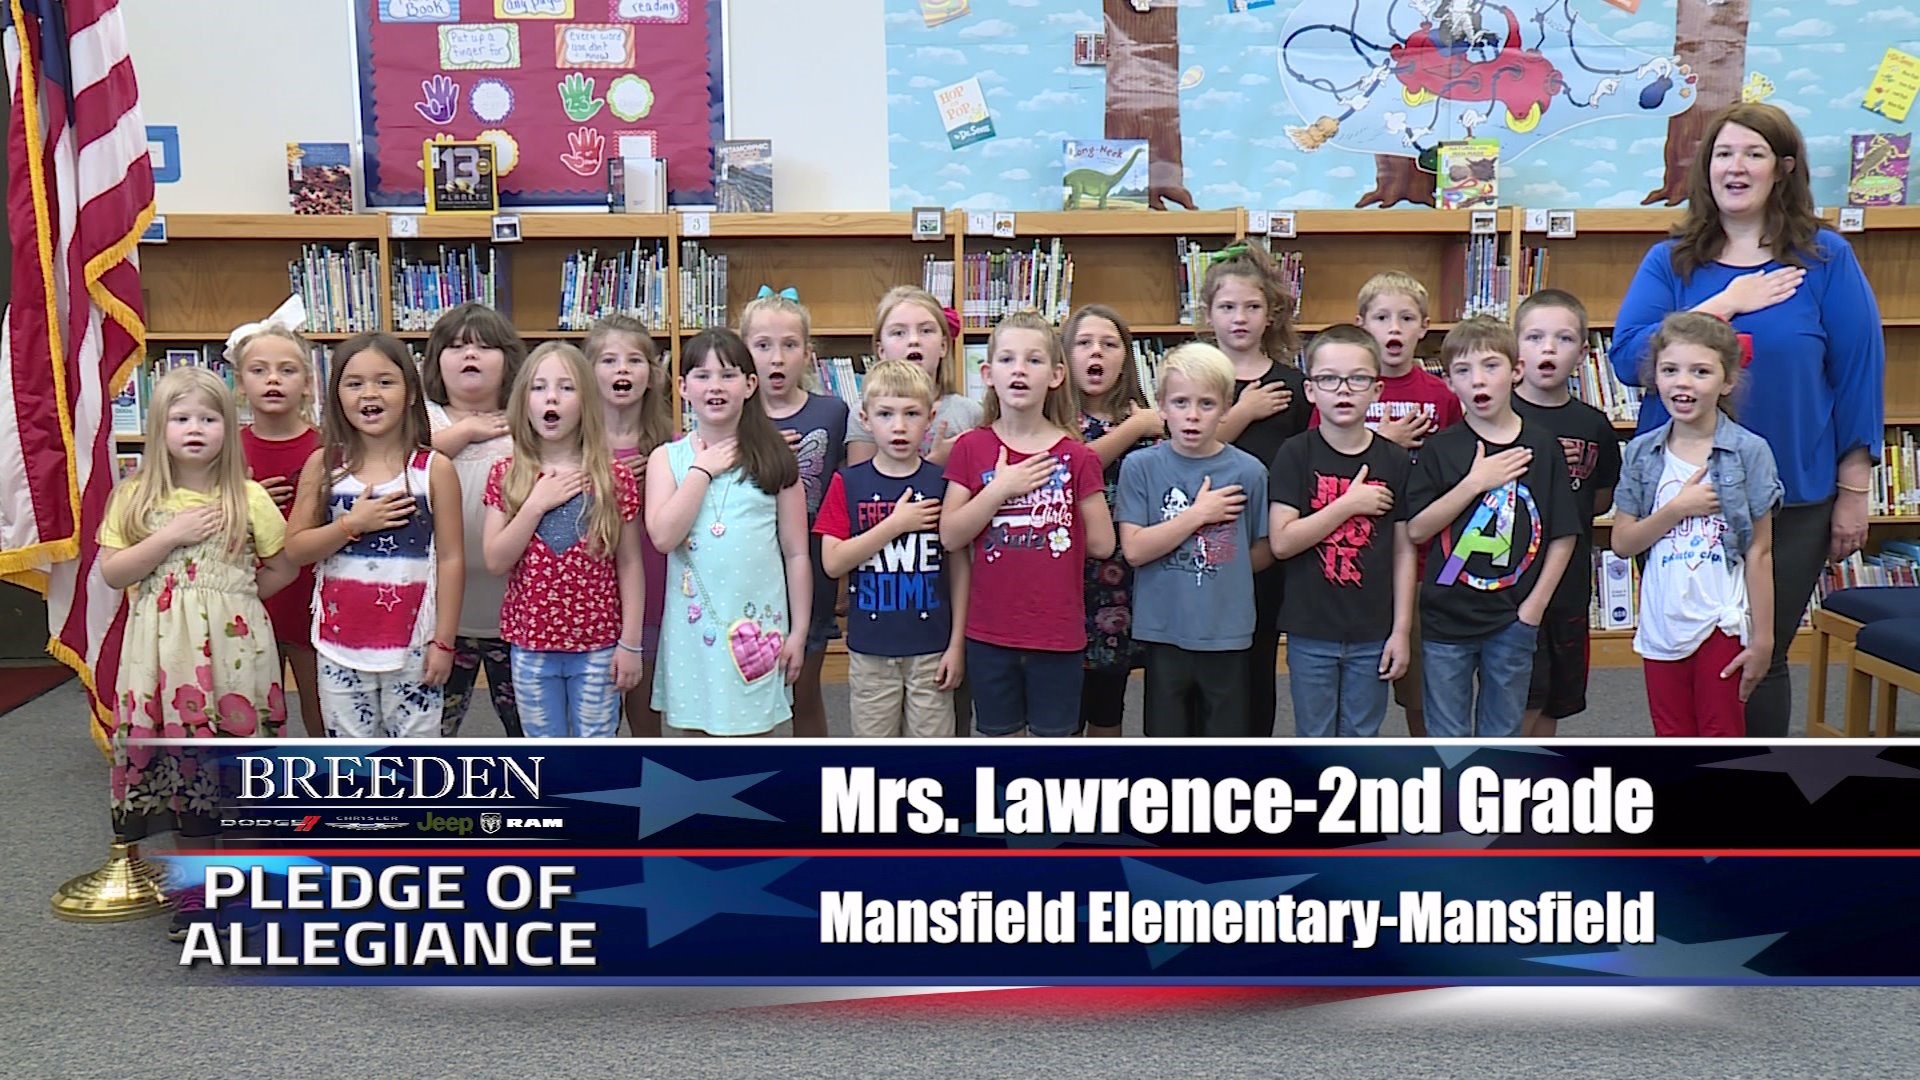 Mrs. Lawrence  2nd Grade Mansfield Elementary, Mansfield